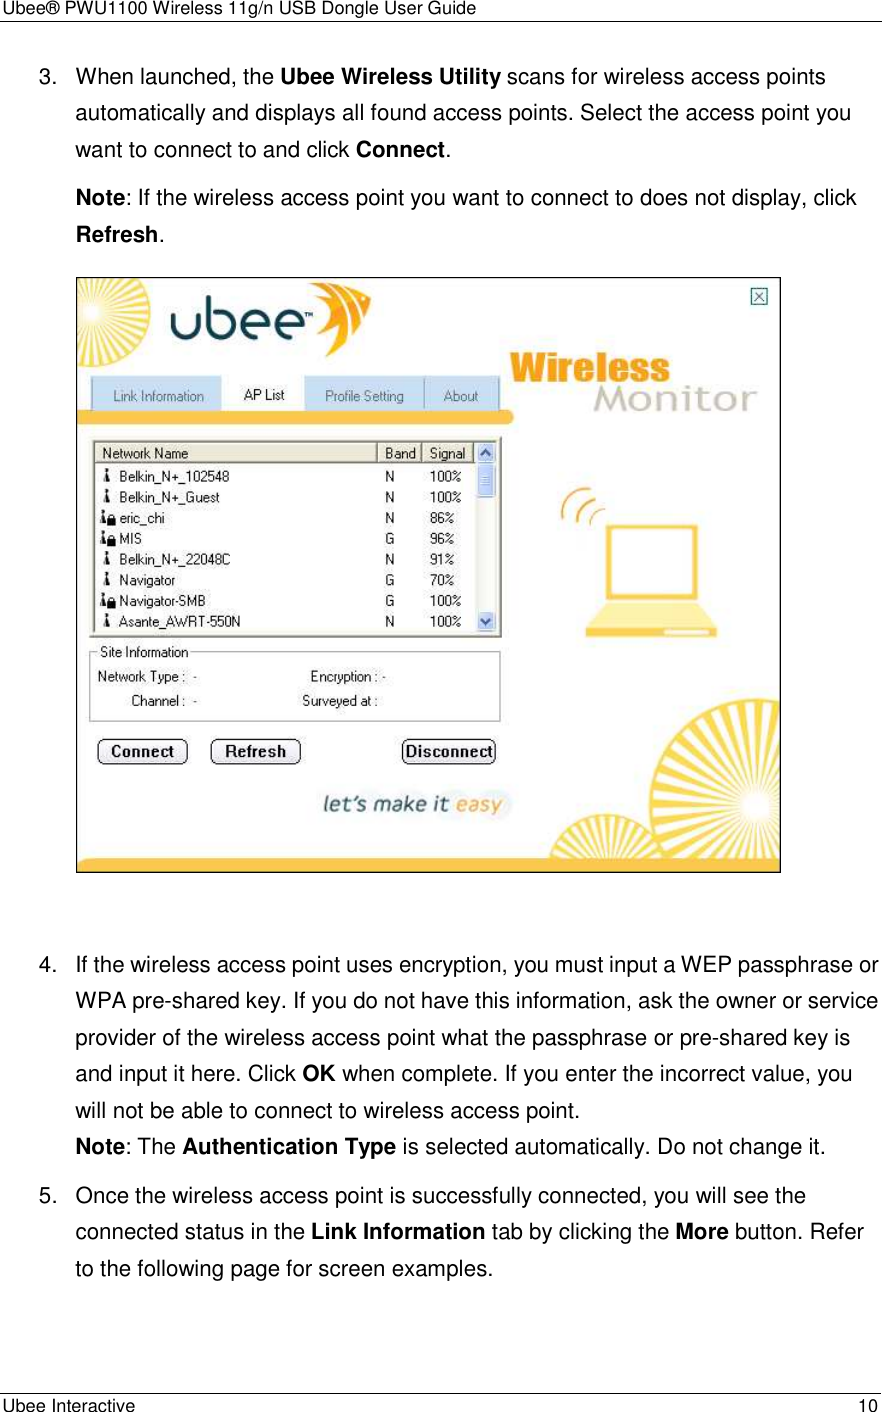 Ubee® PWU1100 Wireless 11g/n USB Dongle User Guide Ubee Interactive    10 3.  When launched, the Ubee Wireless Utility scans for wireless access points automatically and displays all found access points. Select the access point you want to connect to and click Connect. Note: If the wireless access point you want to connect to does not display, click Refresh.   4.  If the wireless access point uses encryption, you must input a WEP passphrase or WPA pre-shared key. If you do not have this information, ask the owner or service provider of the wireless access point what the passphrase or pre-shared key is and input it here. Click OK when complete. If you enter the incorrect value, you will not be able to connect to wireless access point. Note: The Authentication Type is selected automatically. Do not change it. 5.  Once the wireless access point is successfully connected, you will see the connected status in the Link Information tab by clicking the More button. Refer to the following page for screen examples.  